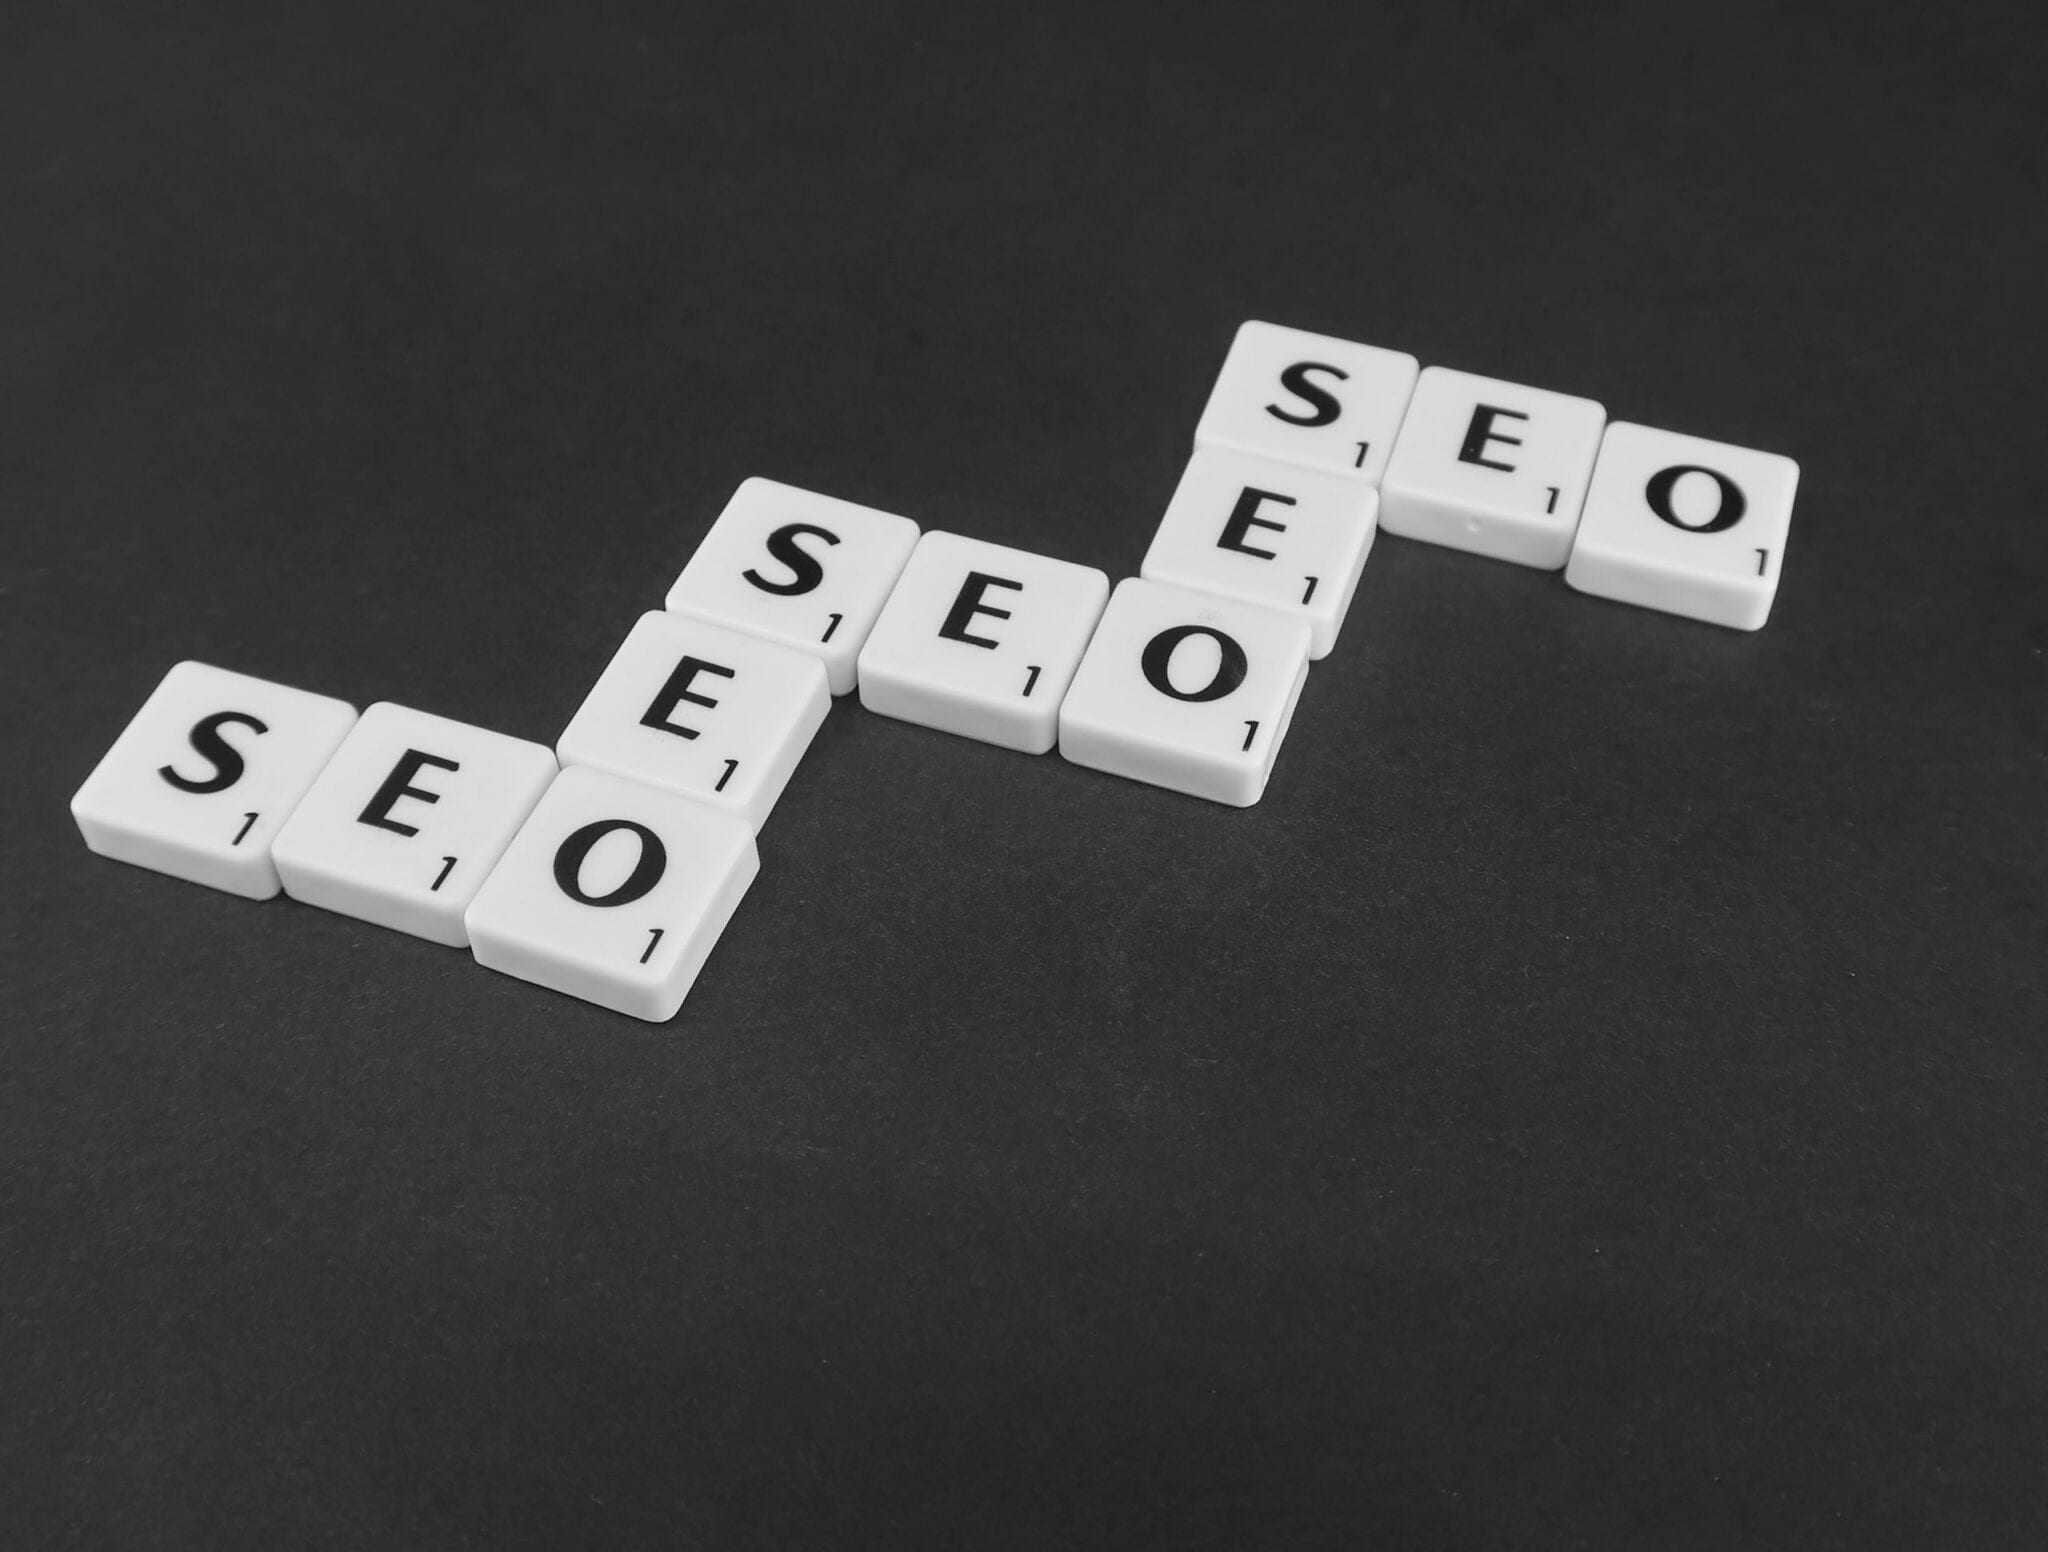 Essential tips to remember when writing content for SEO